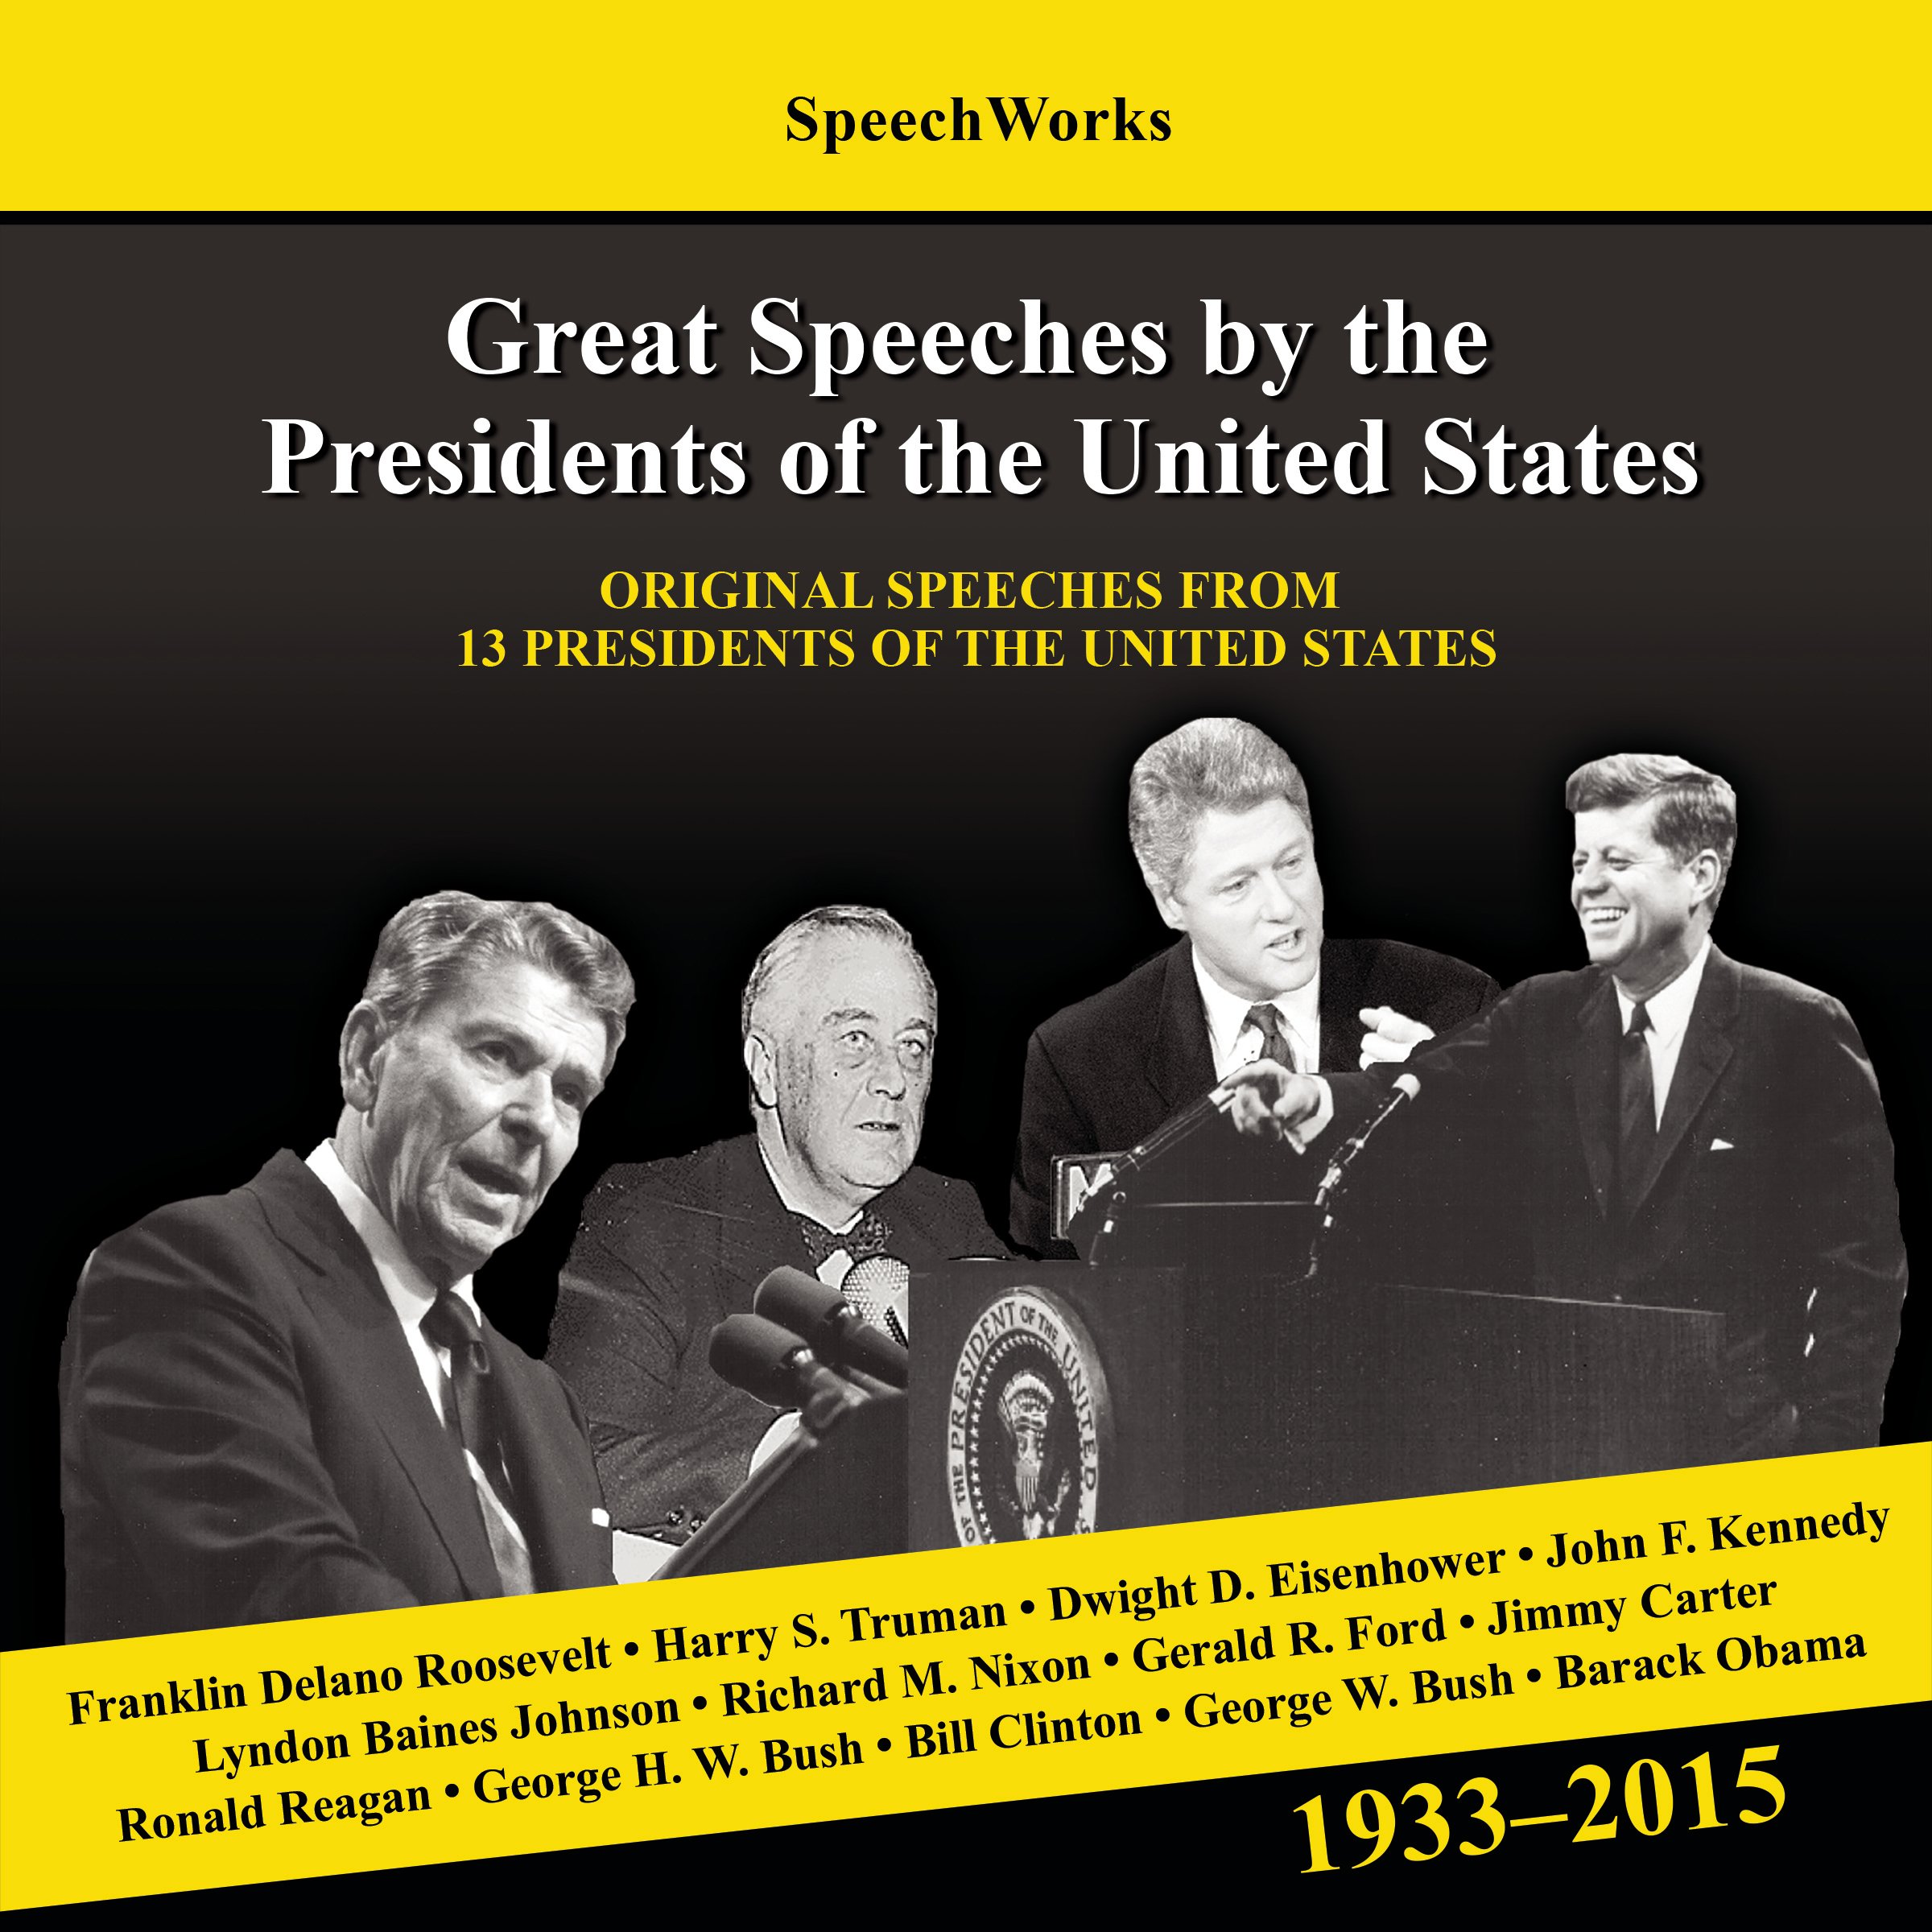 Great Speeches by the Presidents of the United States, 1933 - 2015